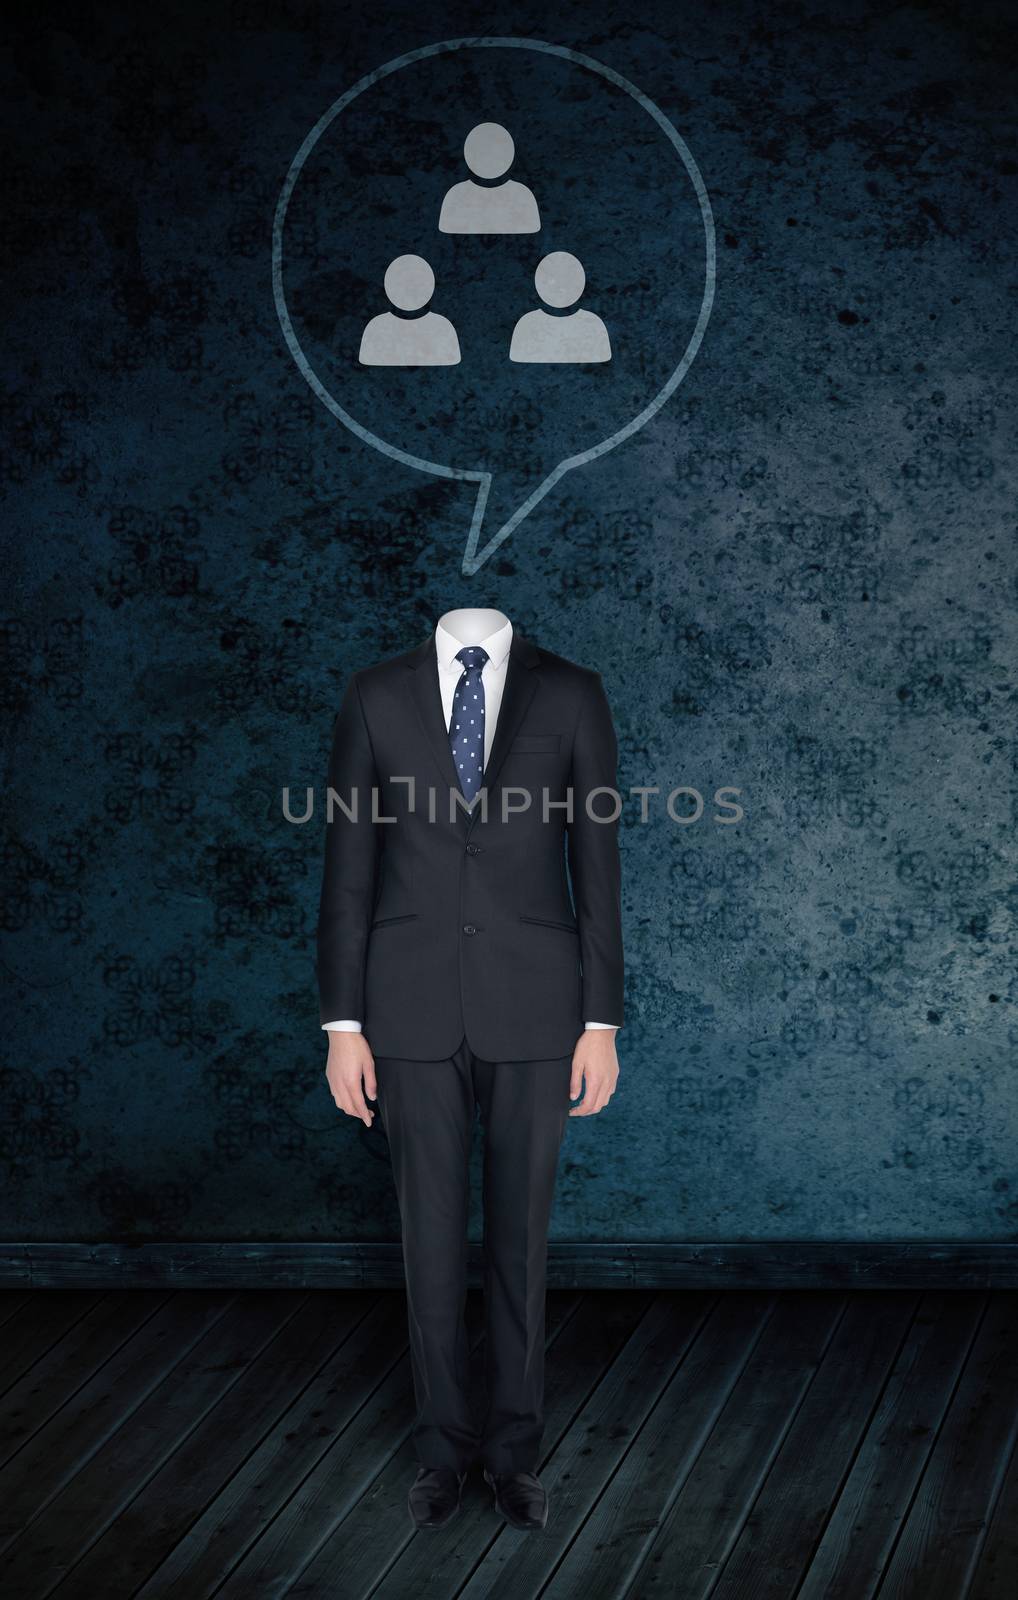 Composite image of headless businessman with speech bubble against dark grimy room